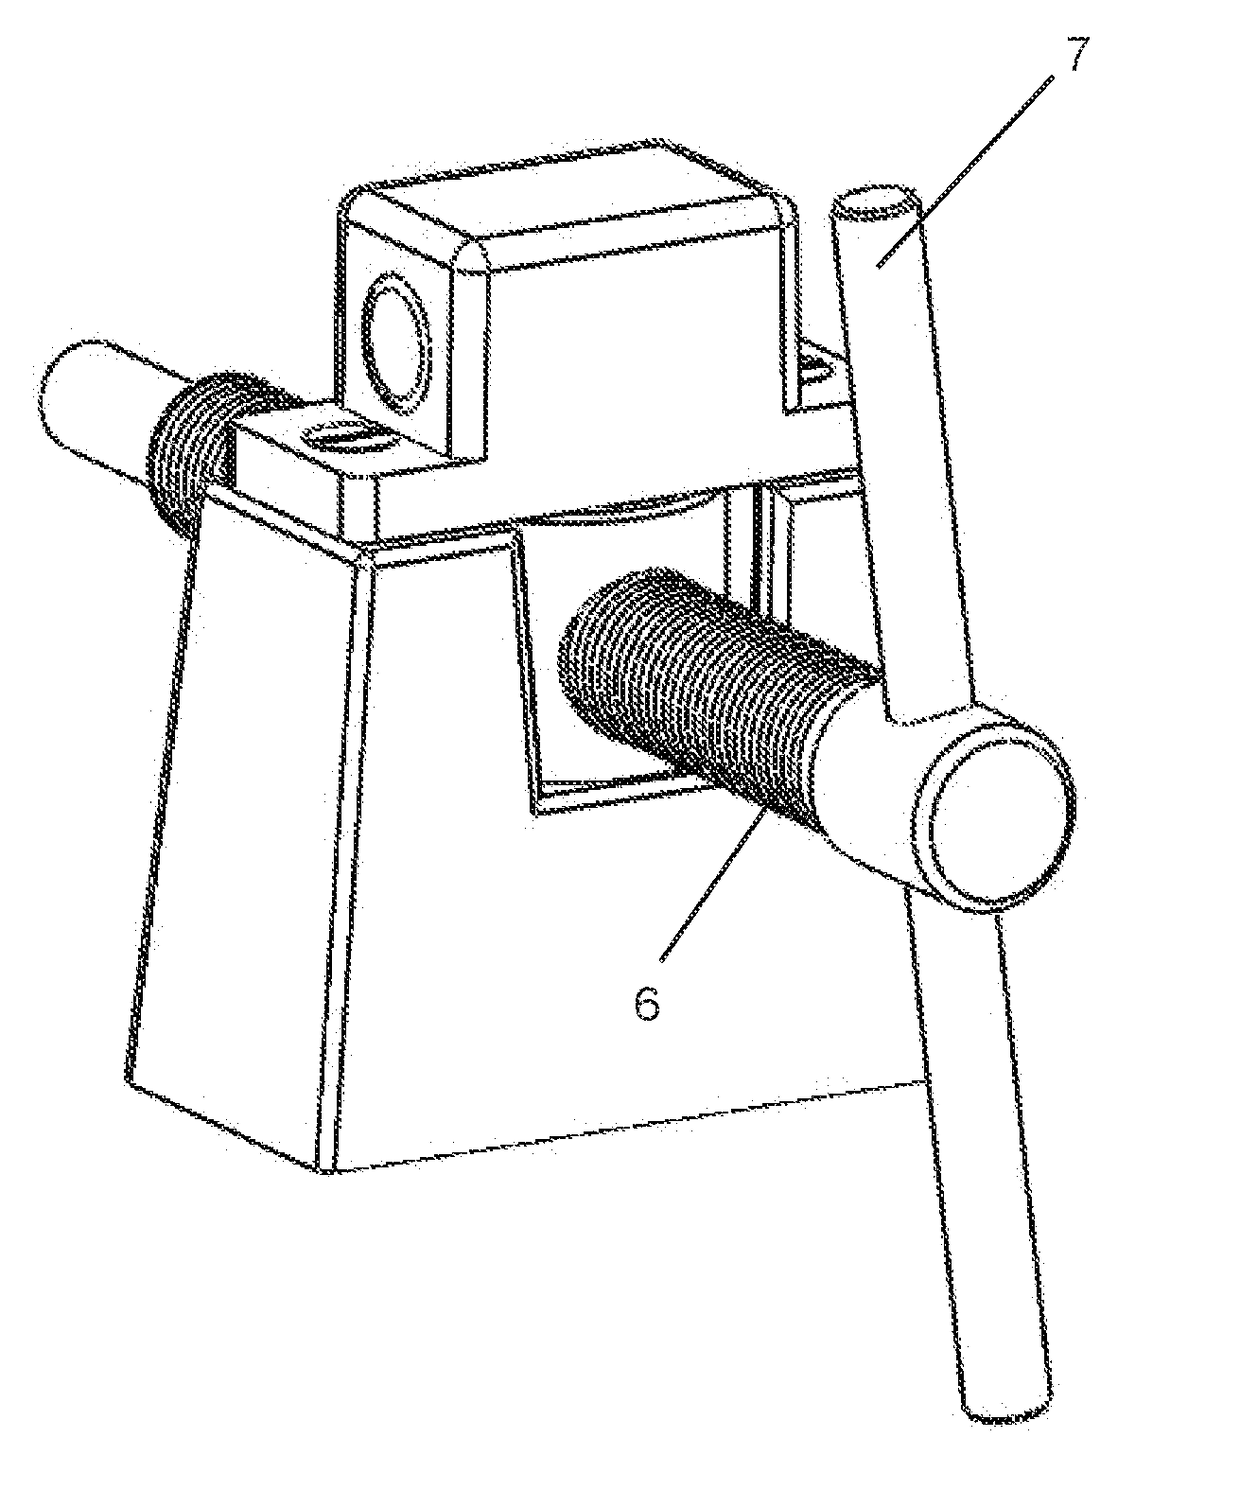 Release Mechanism for Clamping Tools